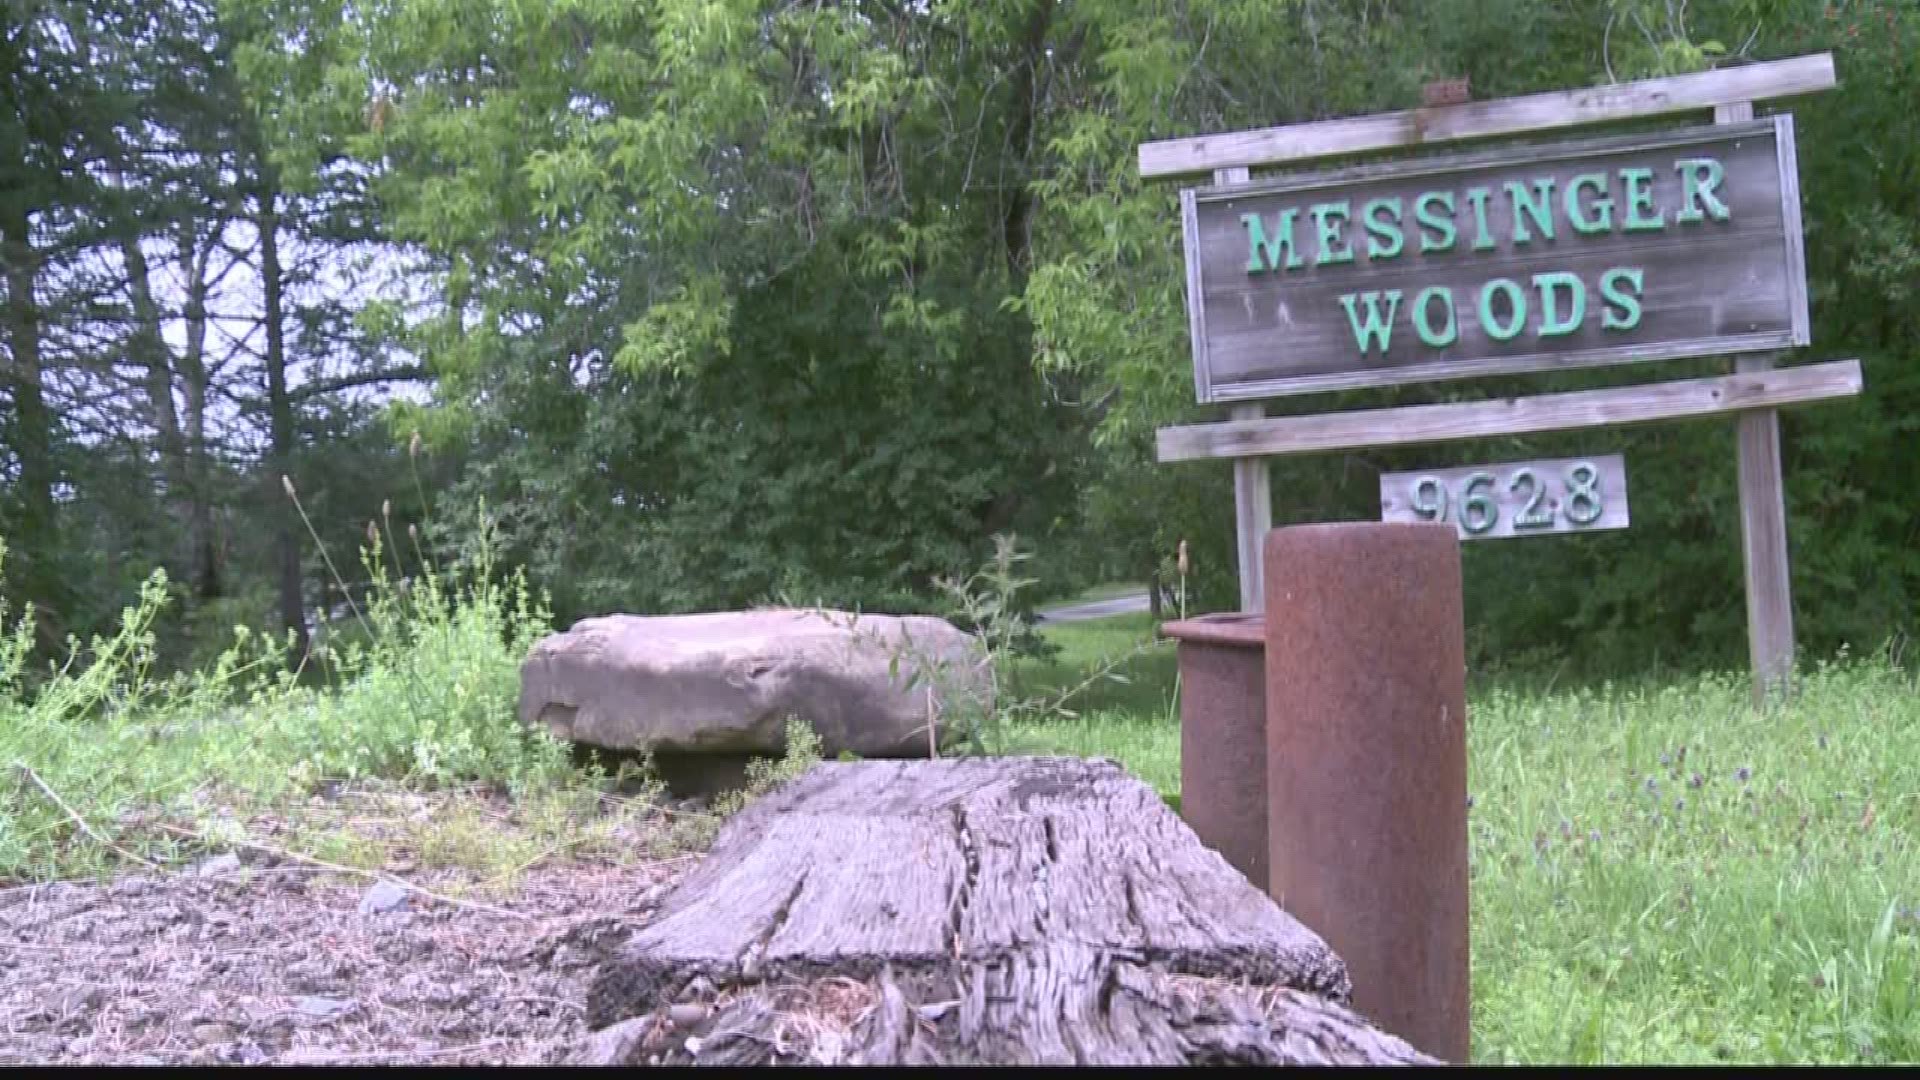 Messinger Woods in one of Western New York's most unique wildlife rehabilitation centers.  Terry Belke explains in this week's 2 the Outdoors segment.